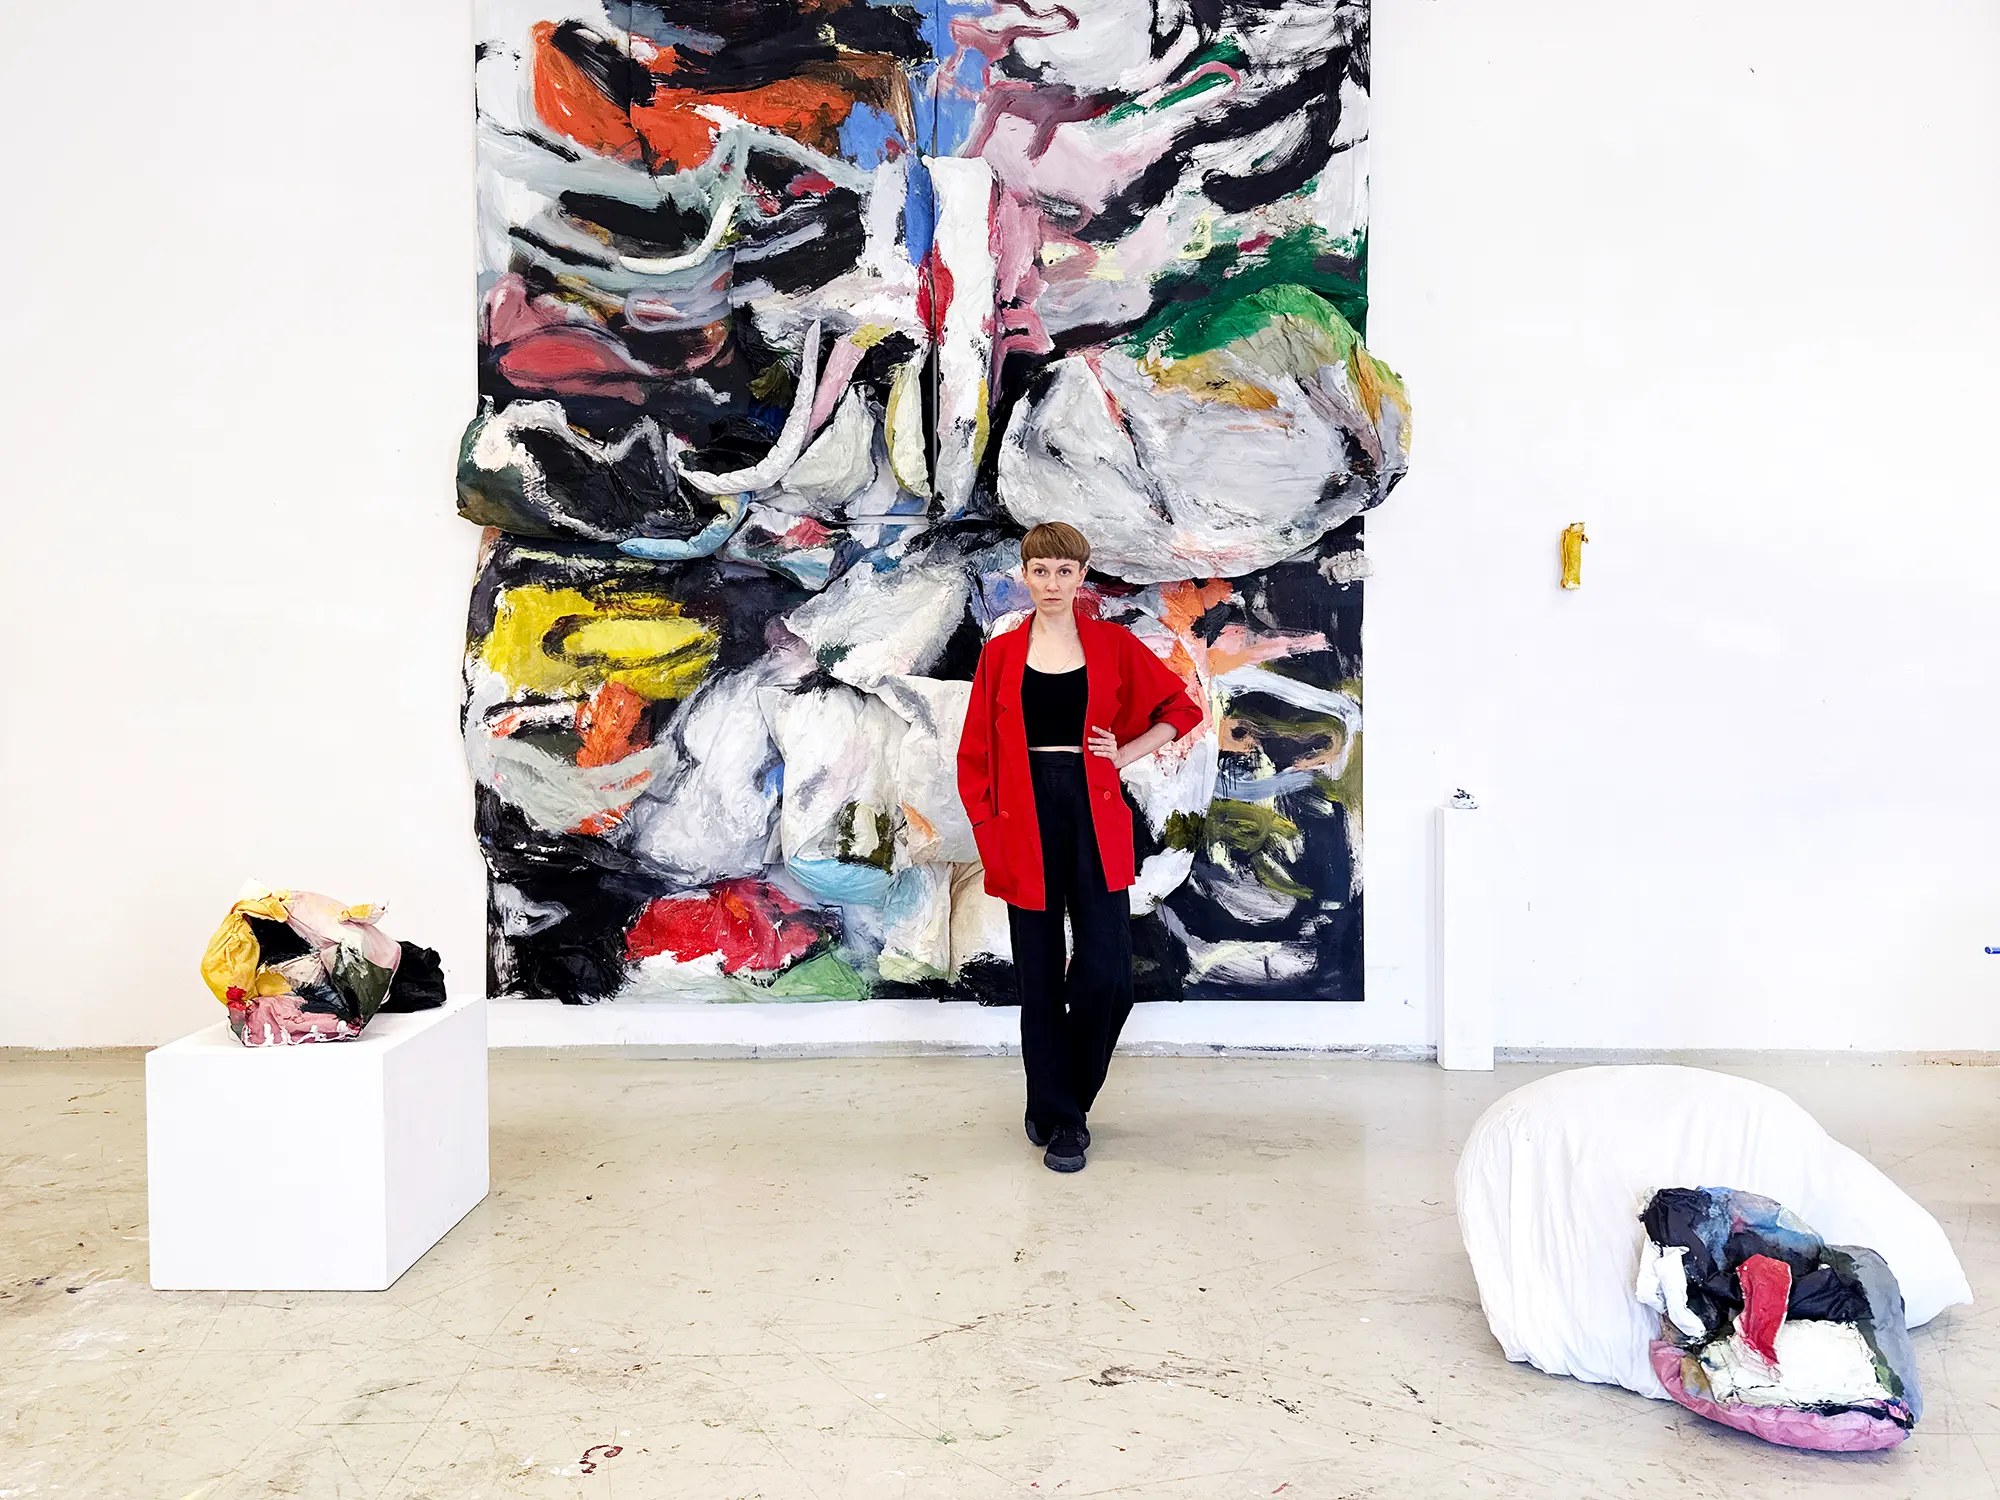 olga shcheblykina standing in front of her abstract, colorful artwork with sculptures on the floo